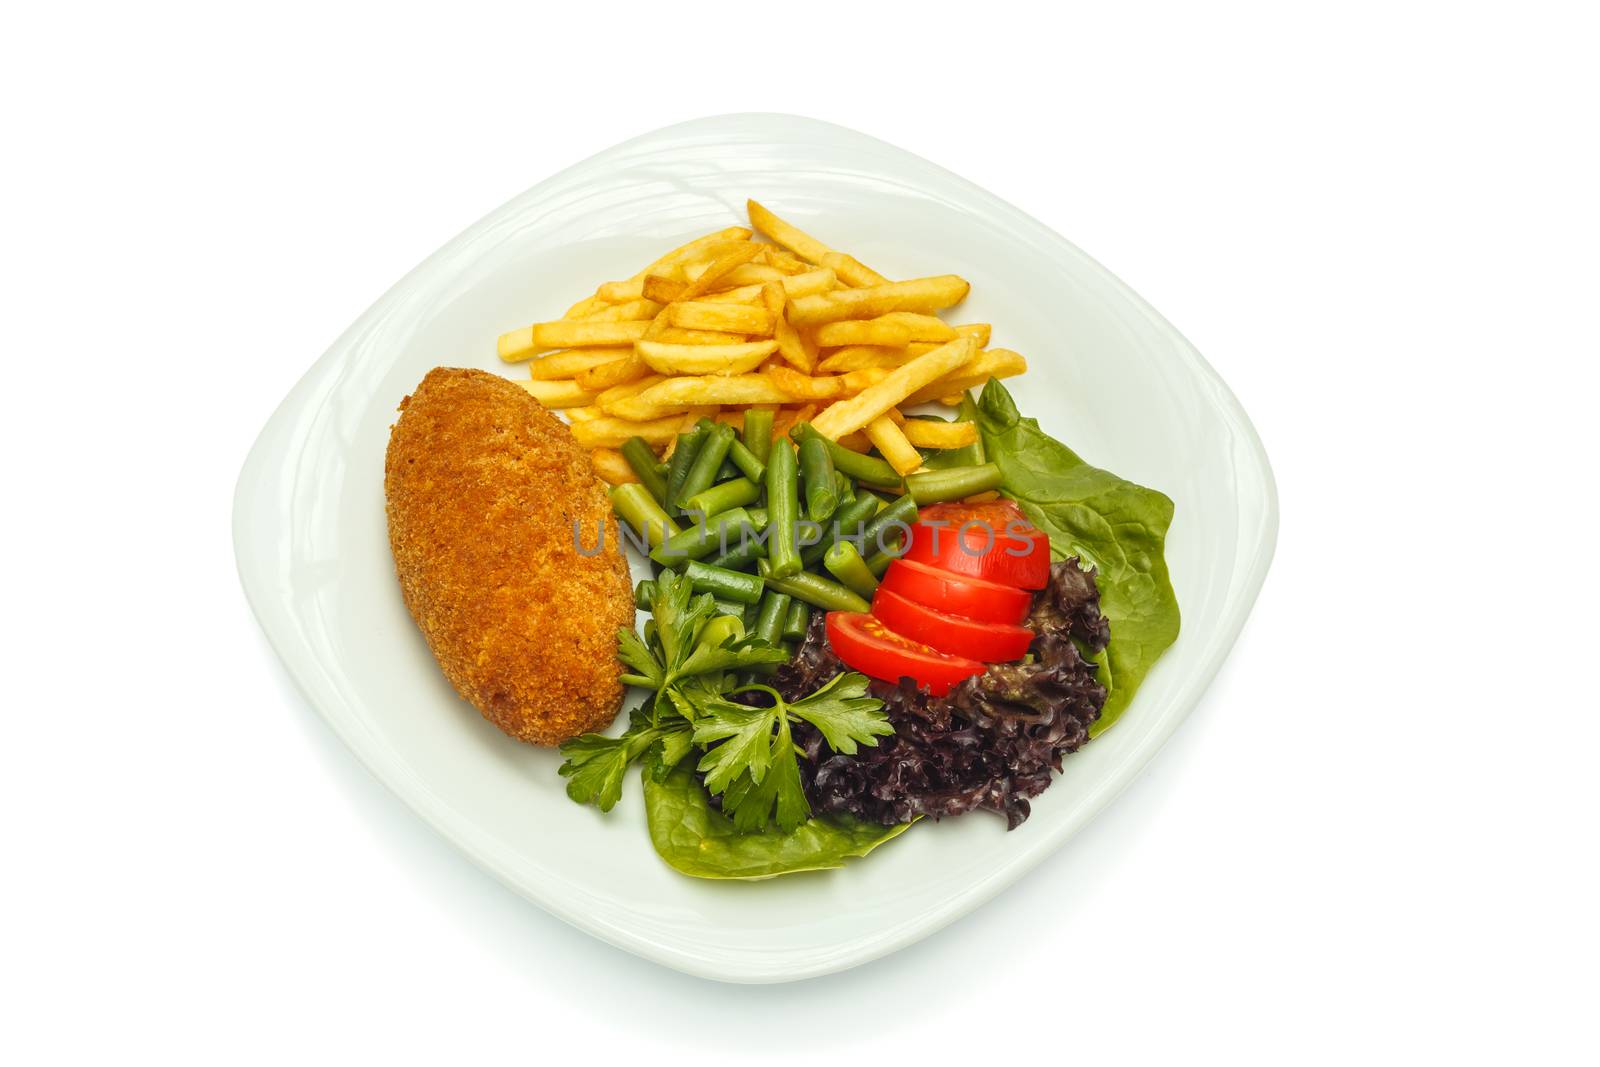 Chicken cutlet with roasted potatoes and vegetables. Shooting on a sheet of white plastic, is not an isolated image